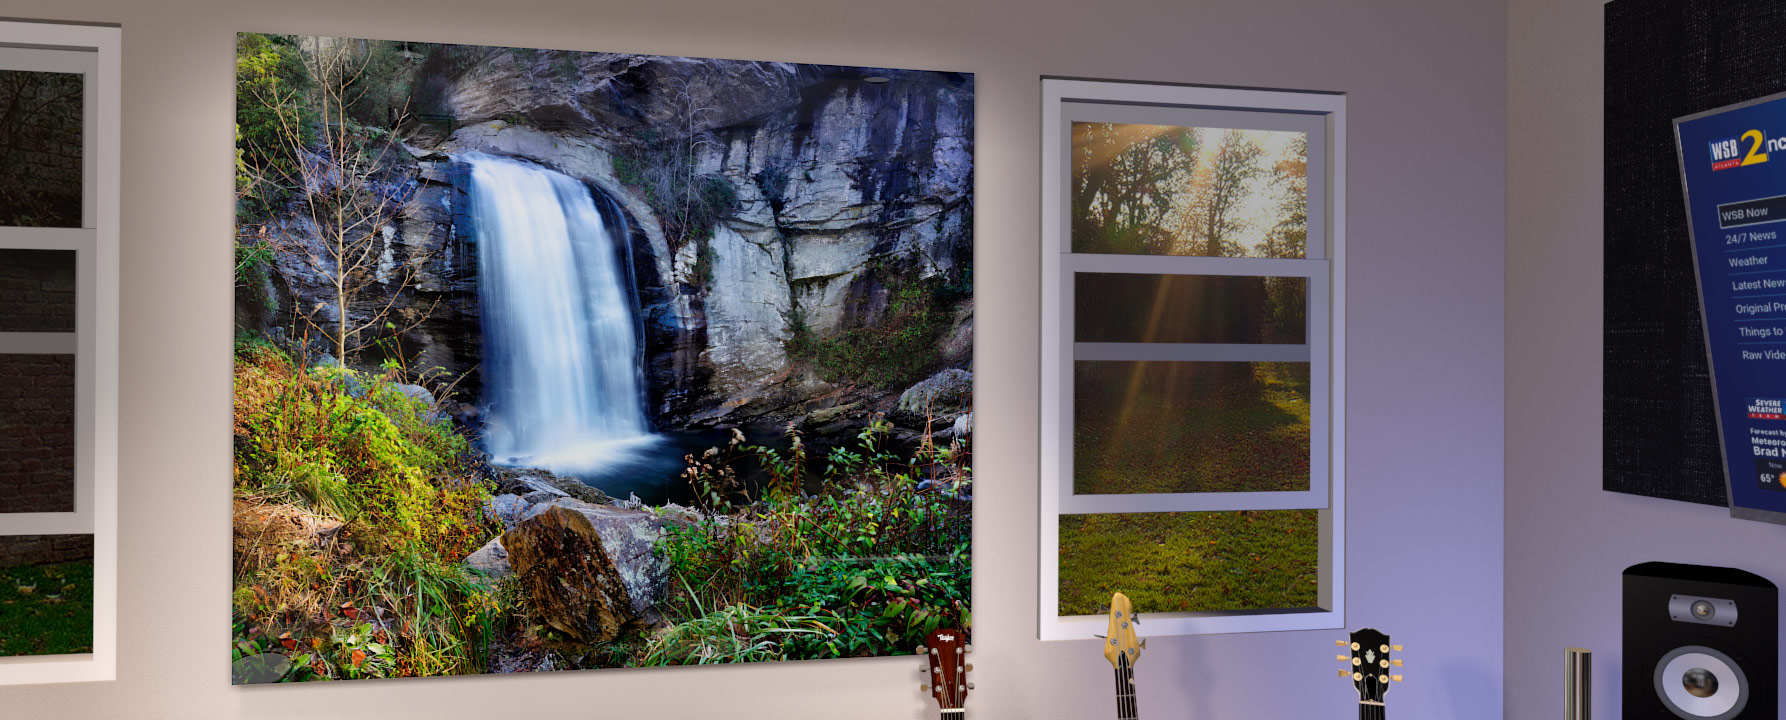 Large format fine art photograph of Looking Glass Falls Image